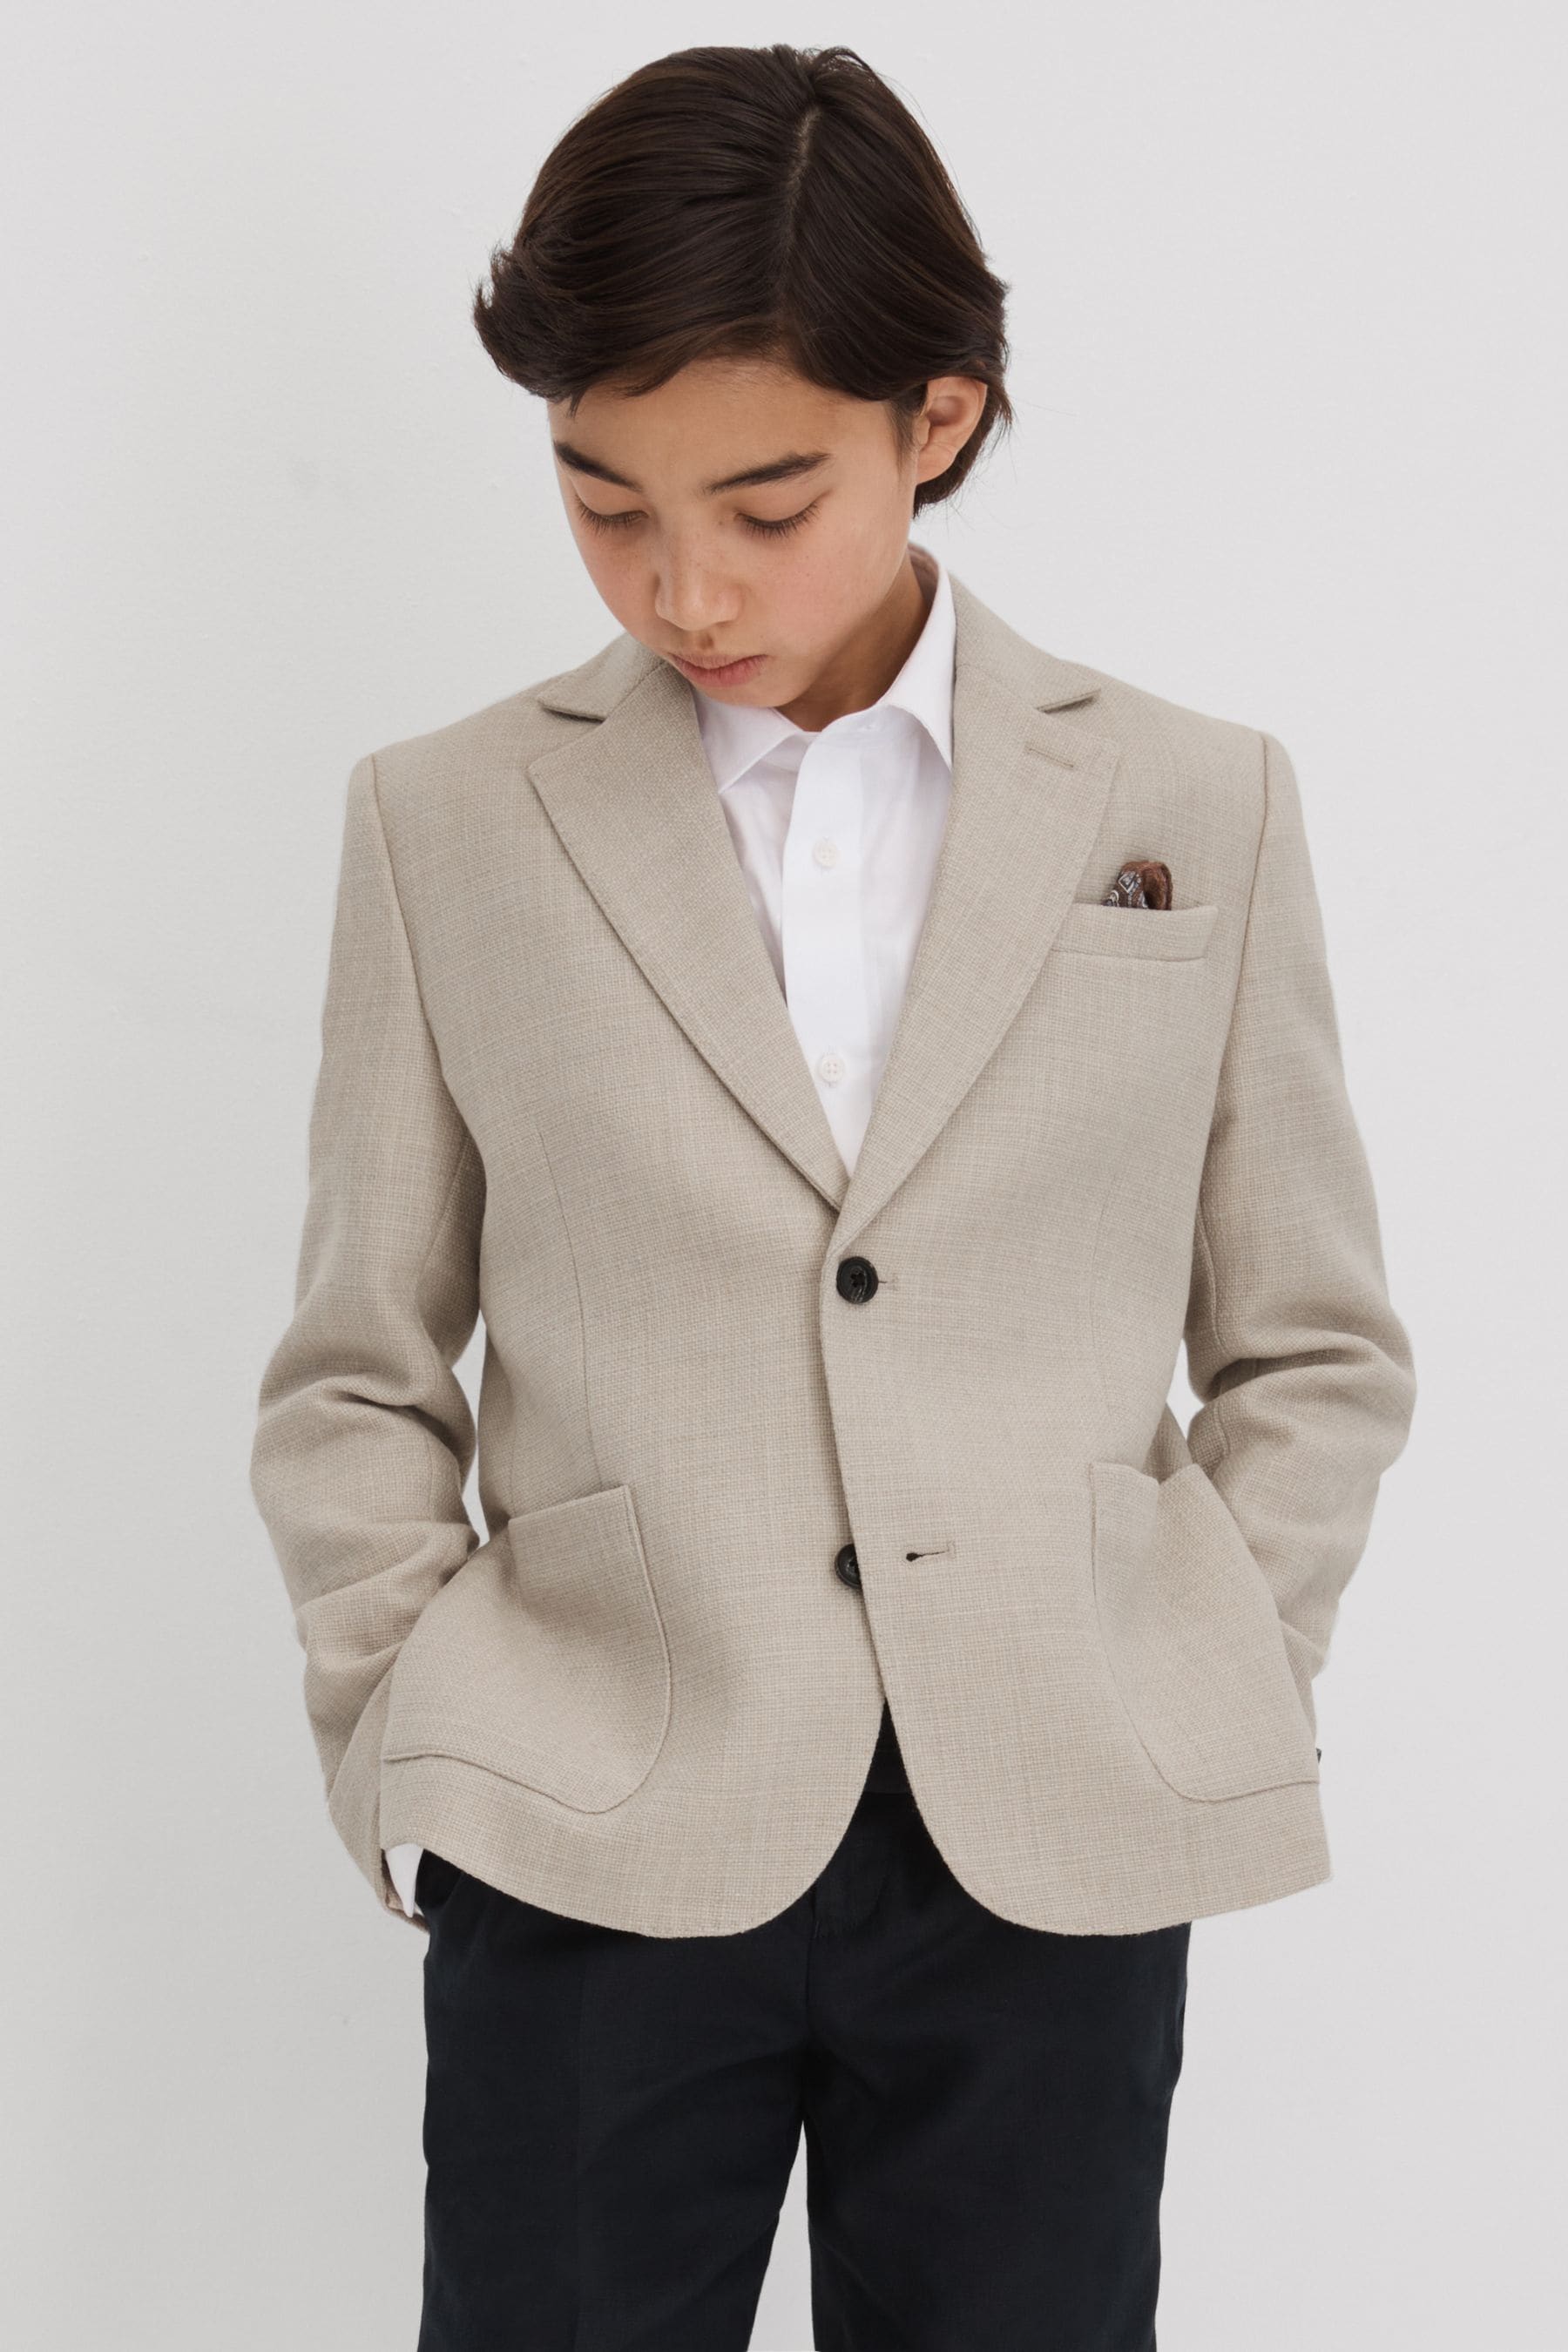 Shop Reiss Attire - Stone Textured Wool Blend Single Breasted Blazer, Age 3-4 Years